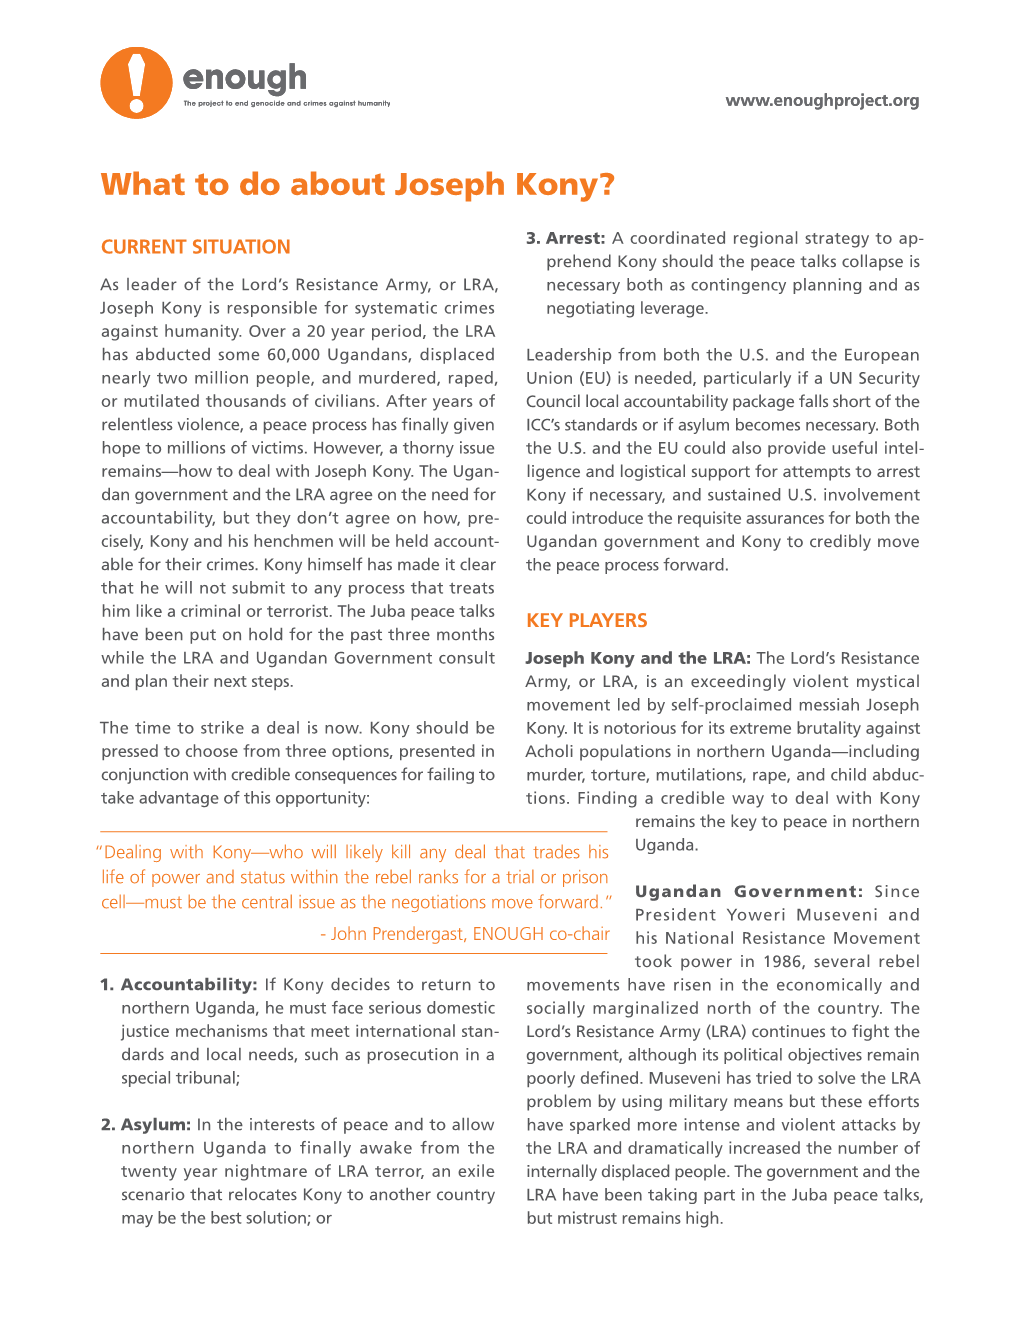 What to Do About Joseph Kony?